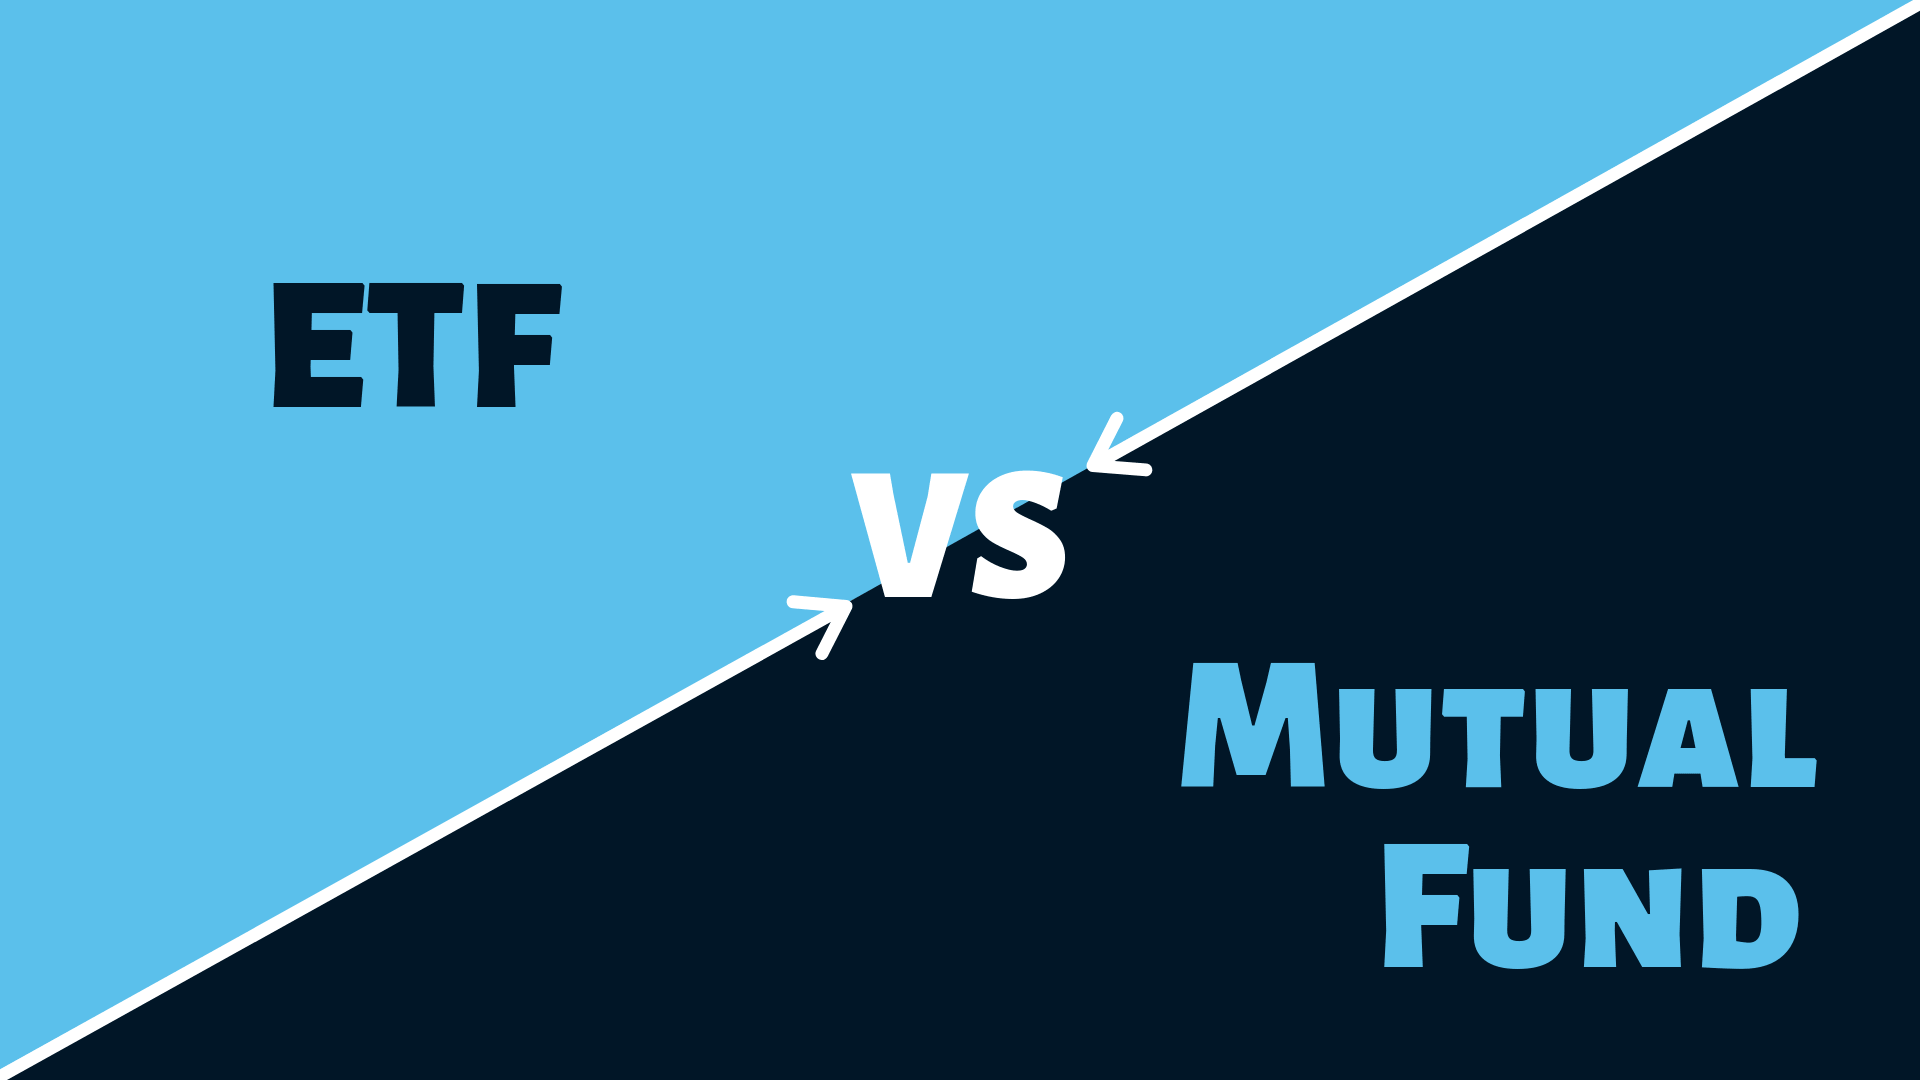 etfs vs. mutual funds: which one is the best investment for 2021?